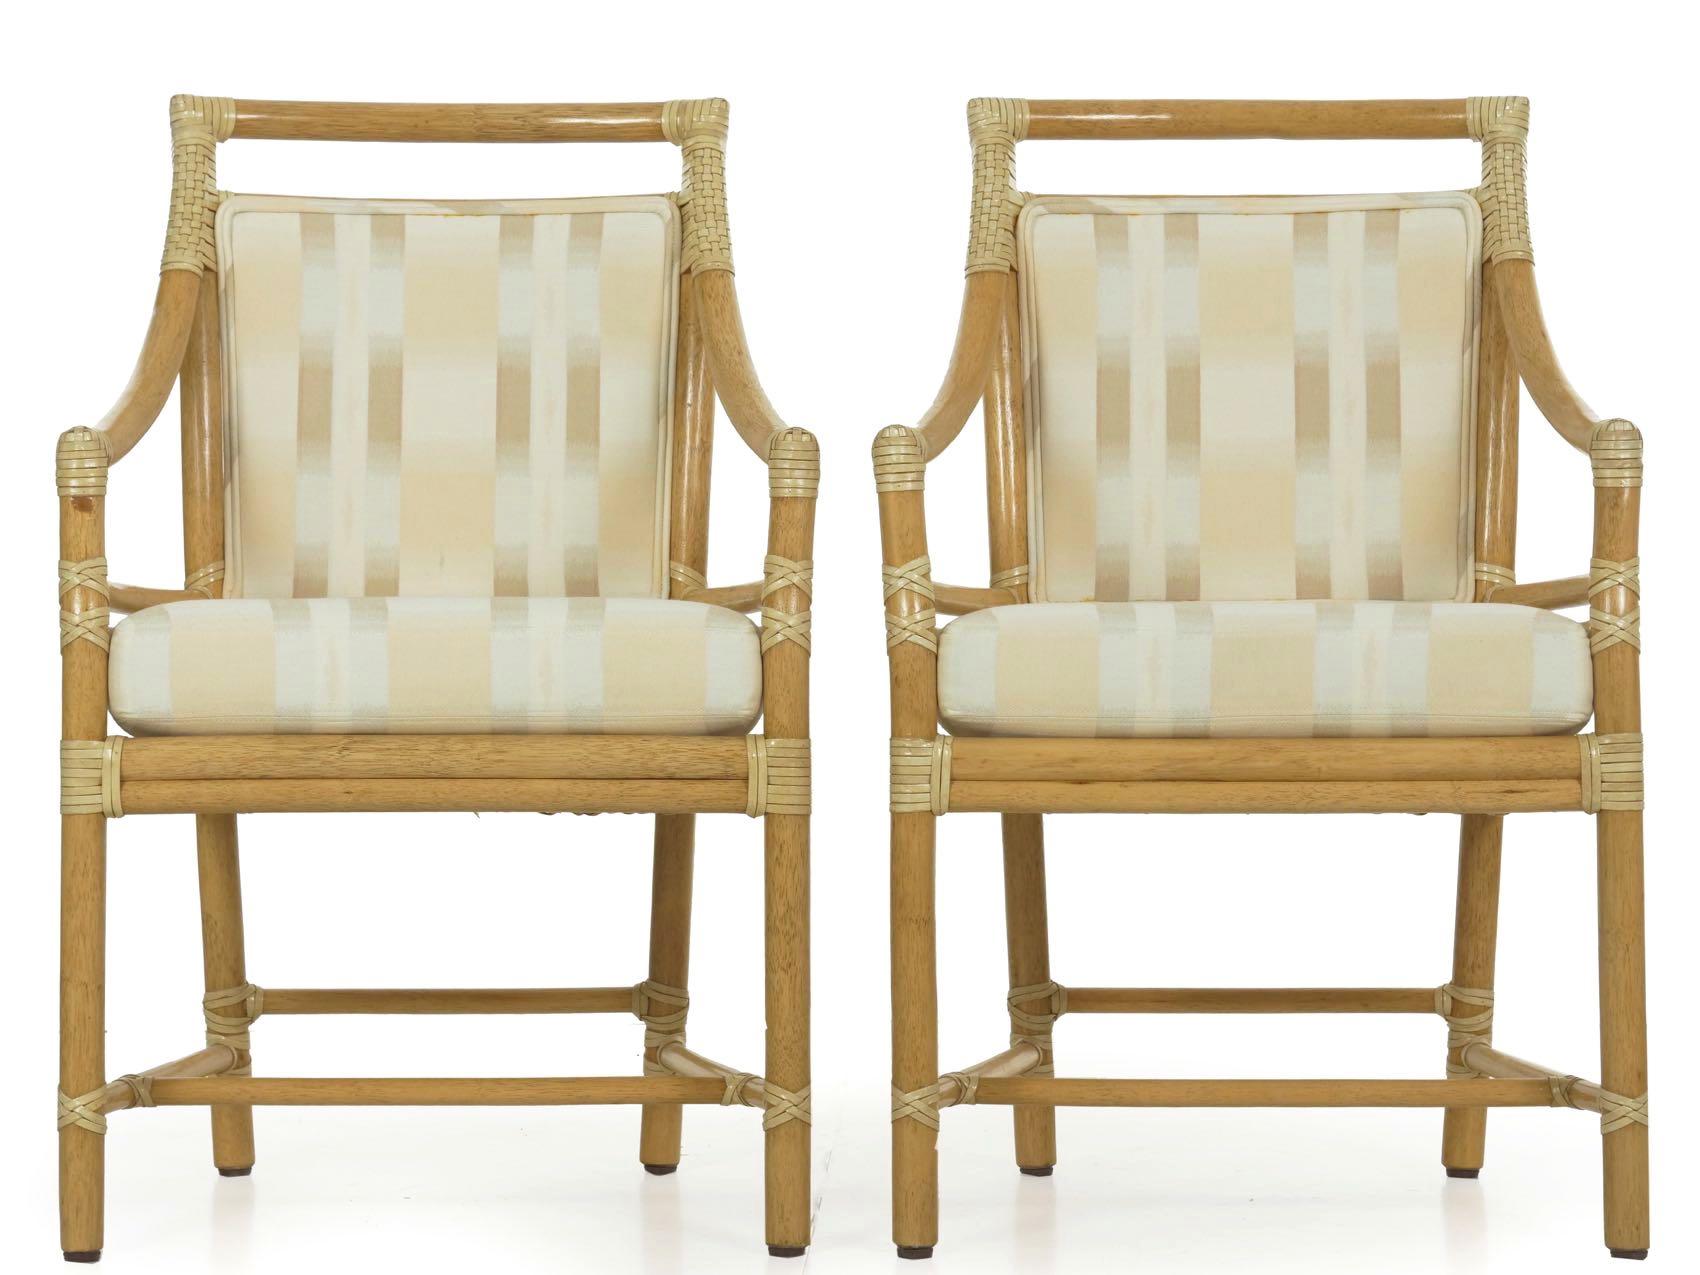 A gorgeous set of McGuire's highly sought-after Rattan 